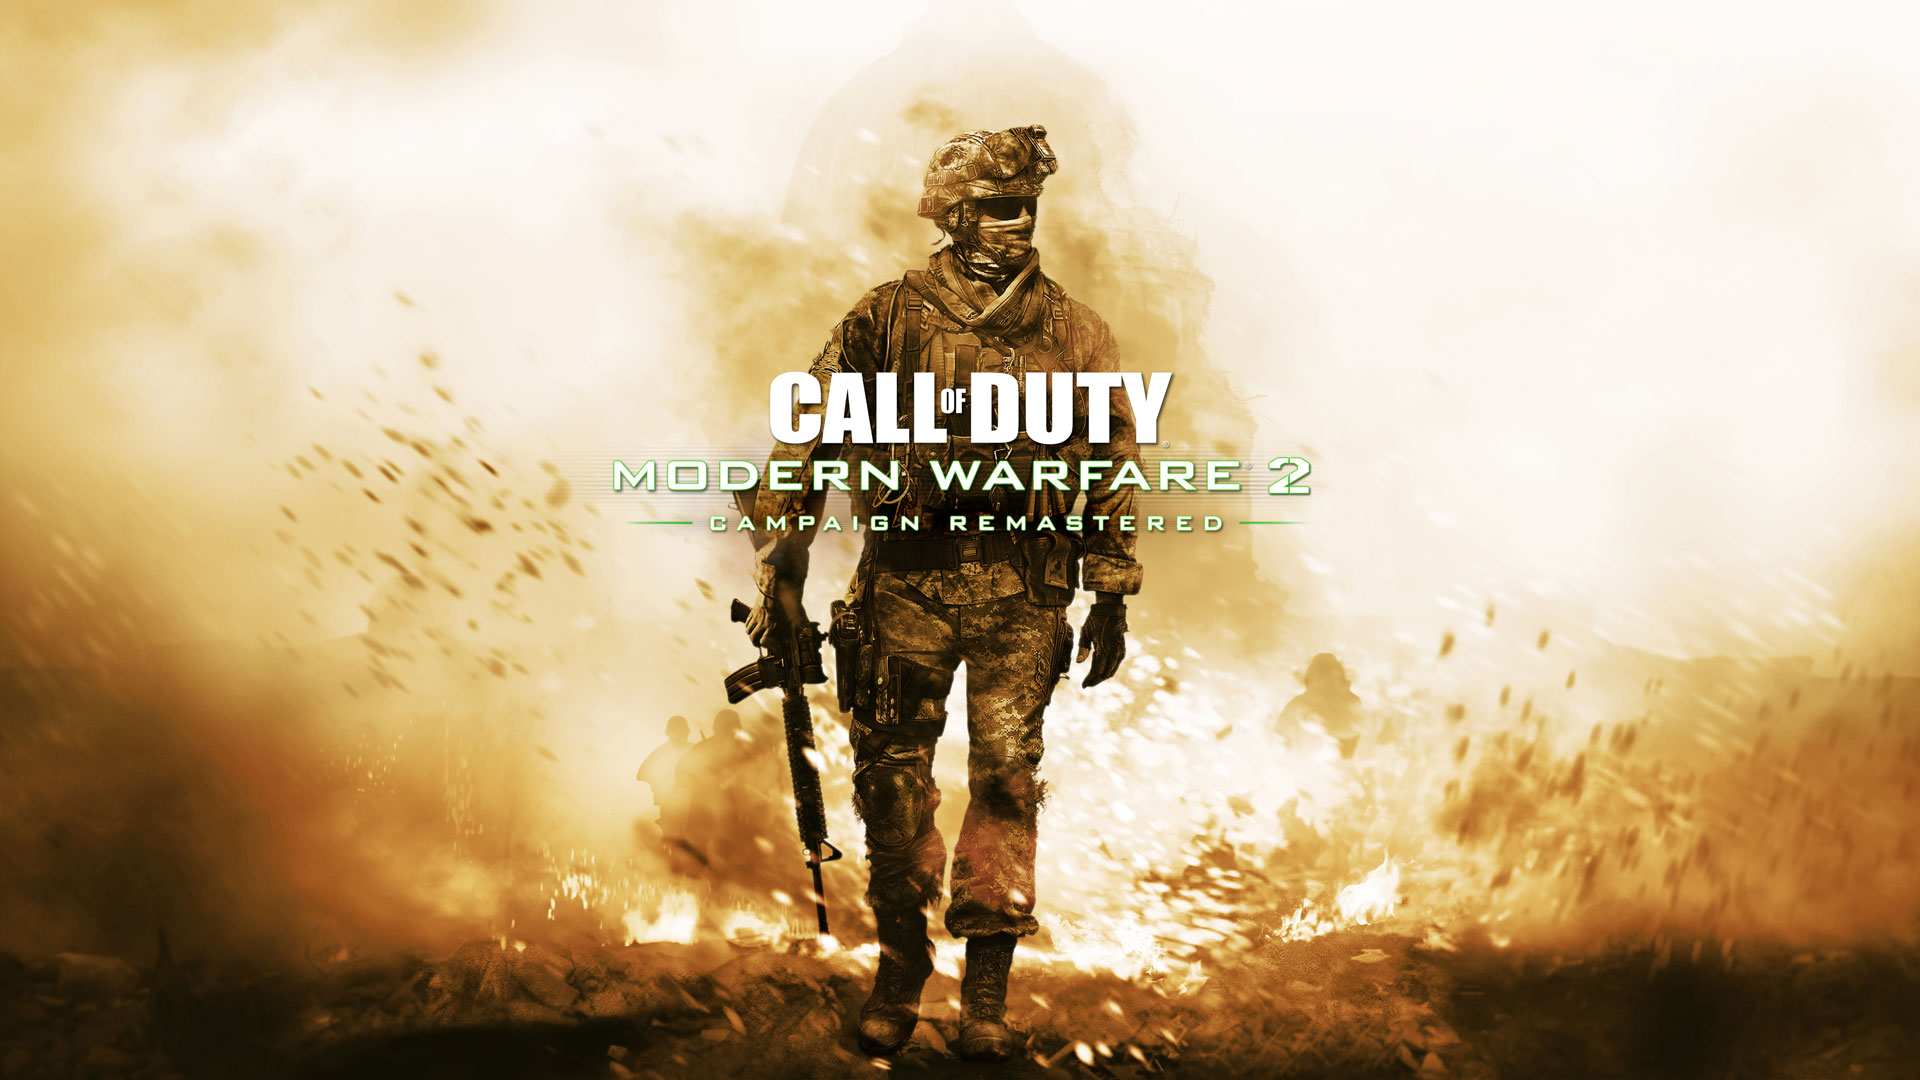 Announcing Call Of Duty Modern Warfare Campaign Remastered